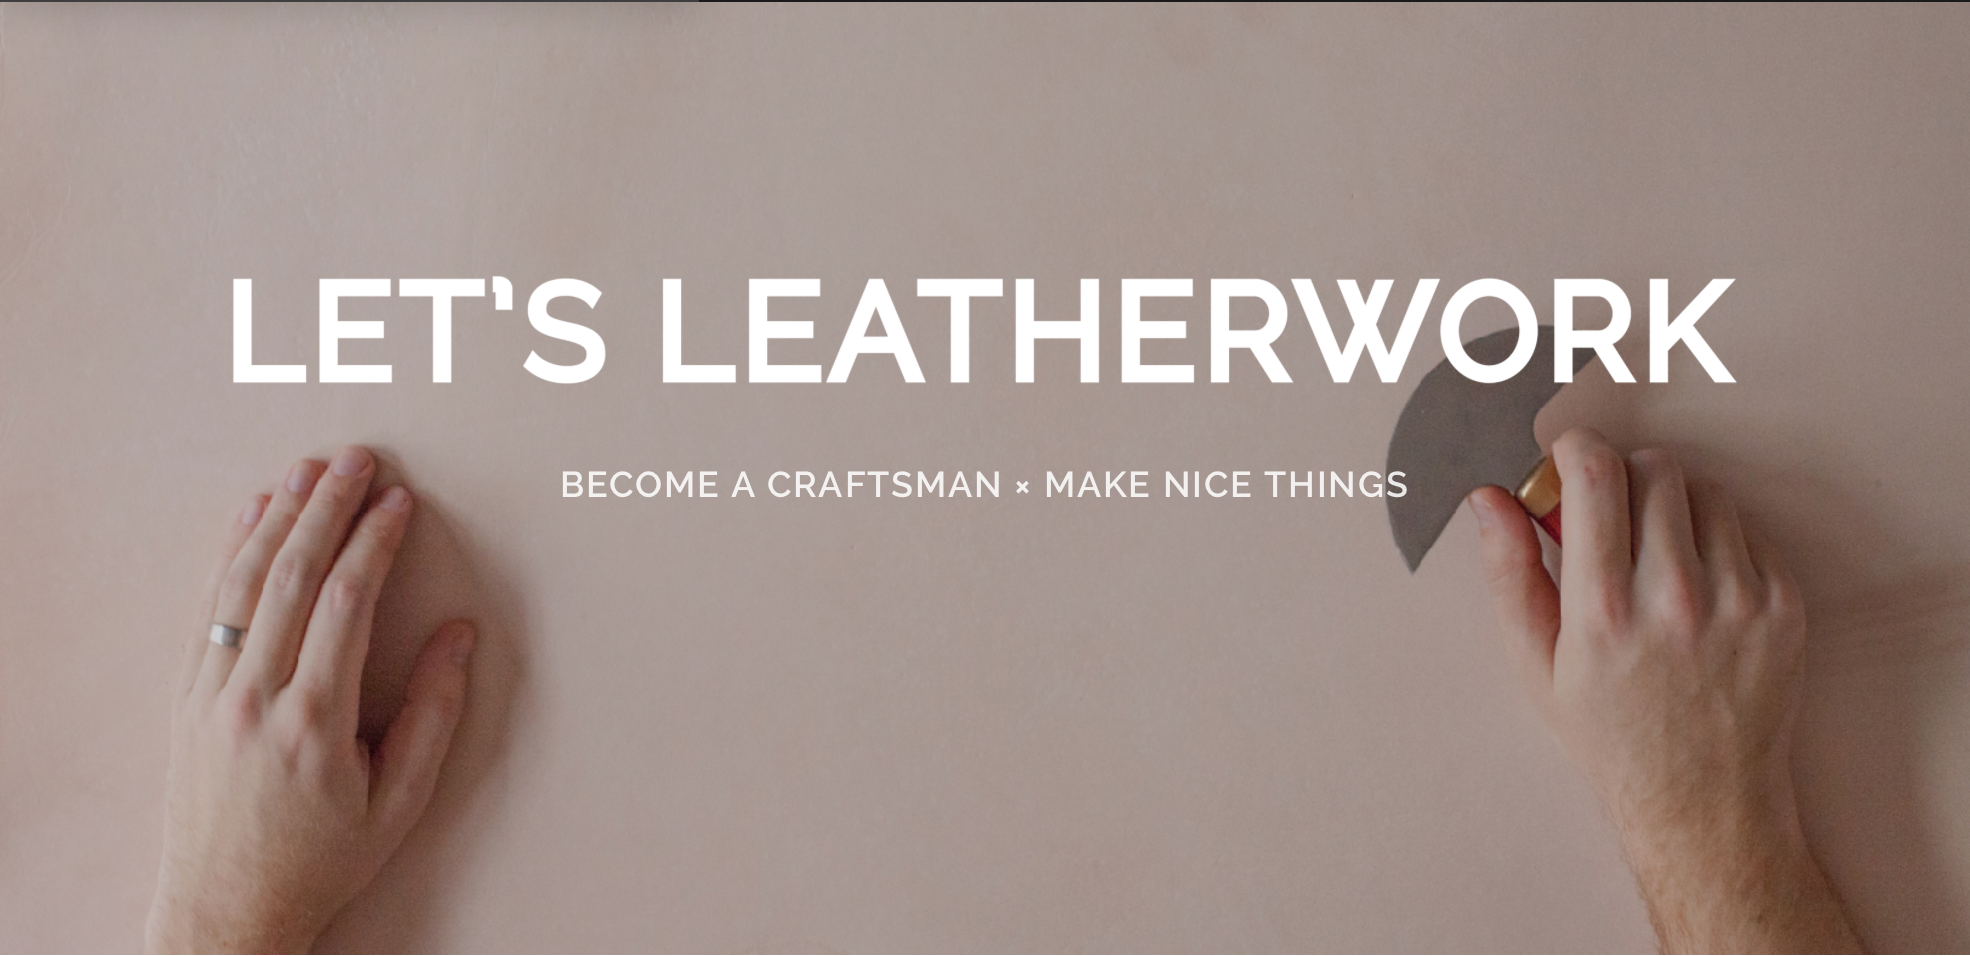 4 Tips for Introducing Kids to Leatherworking